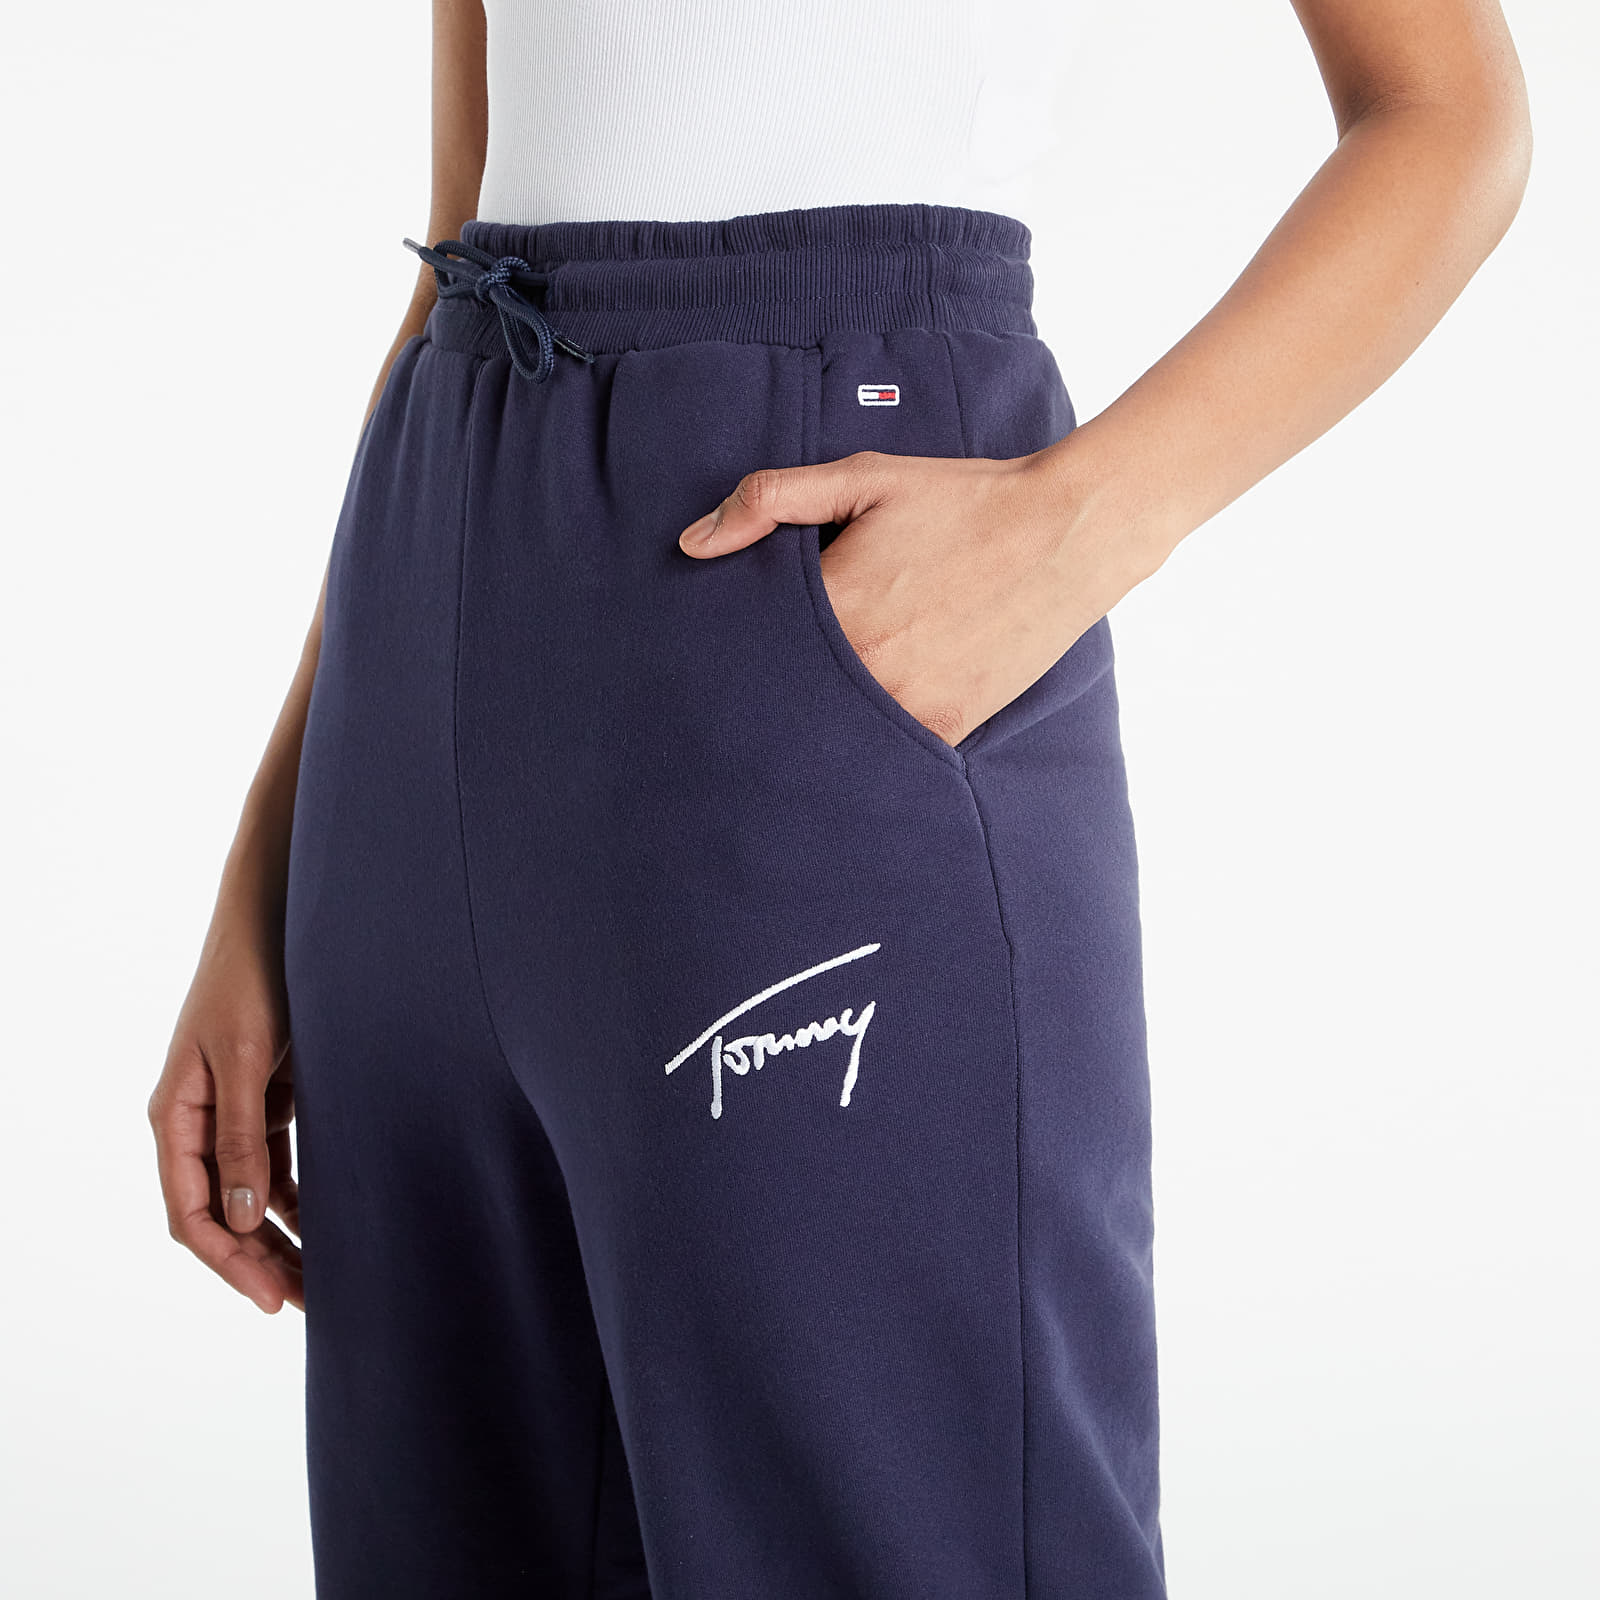 Tommy | Pants Navy and jeans Signature Sweatpants Footshop Jeans Tommy Twilight